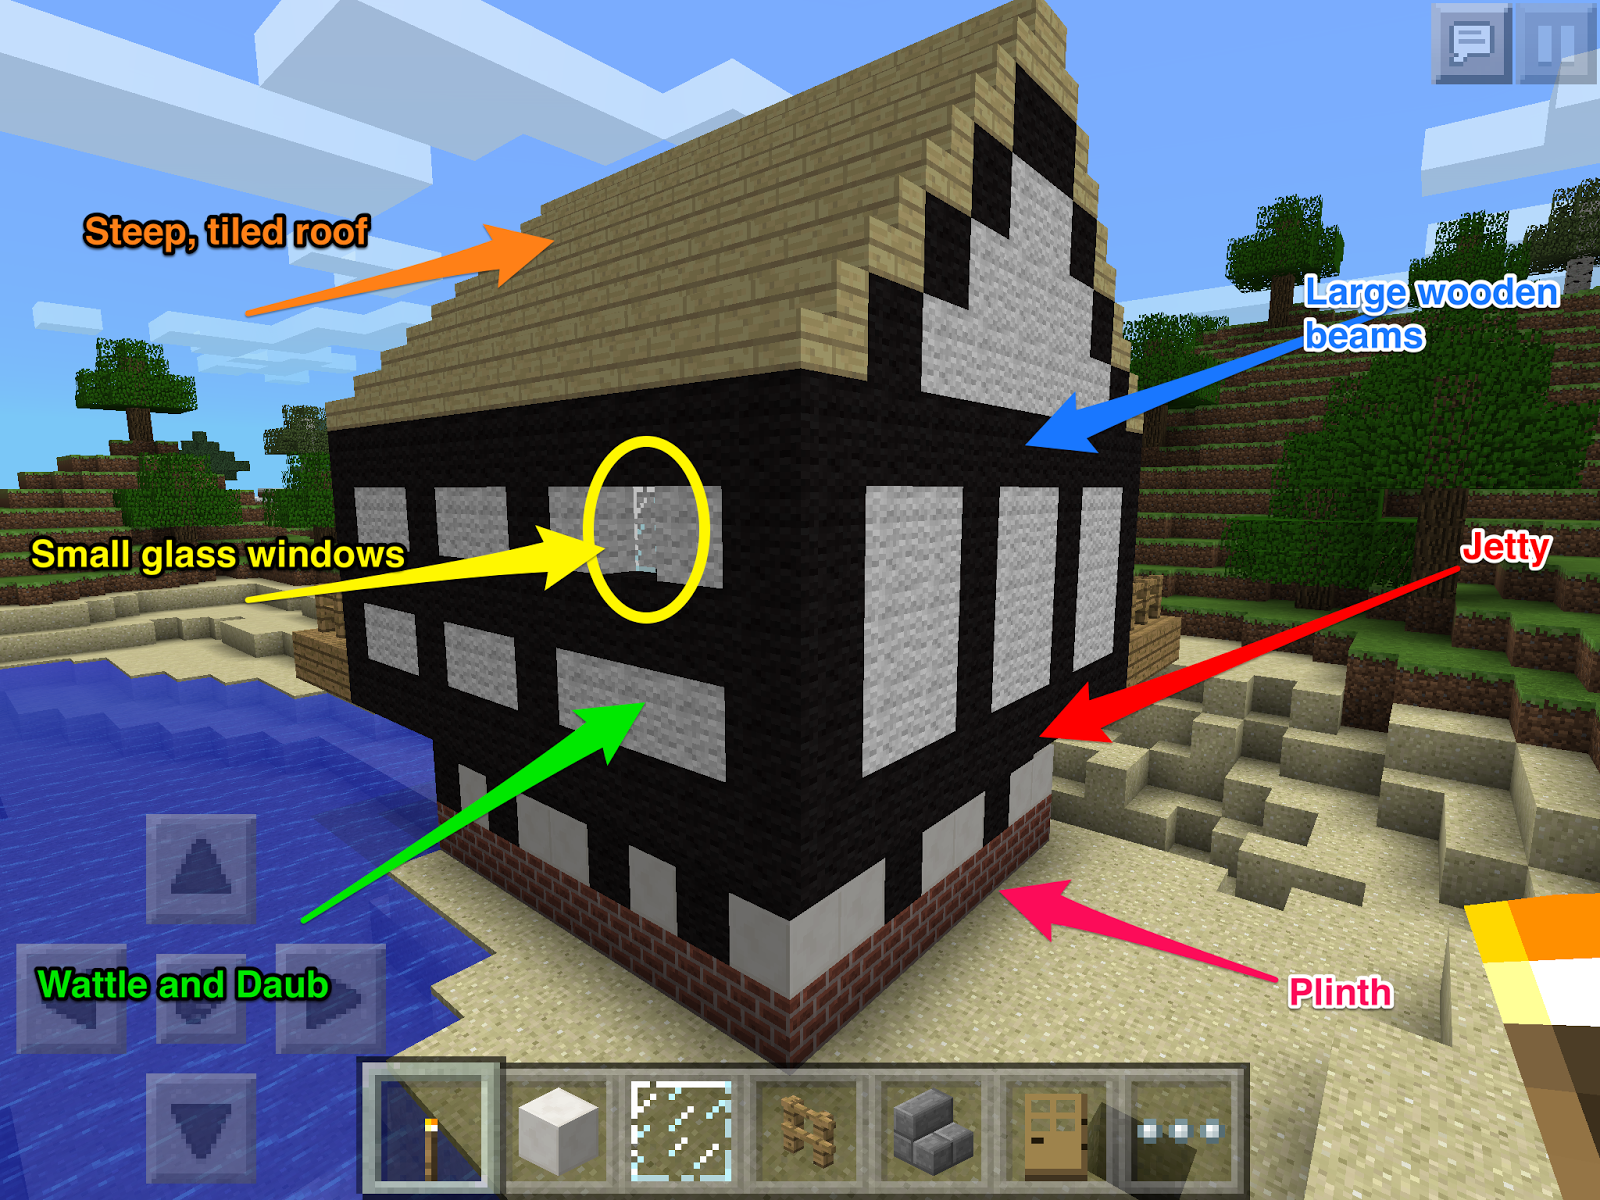 Minecraft being used to successfully teach geography, physics